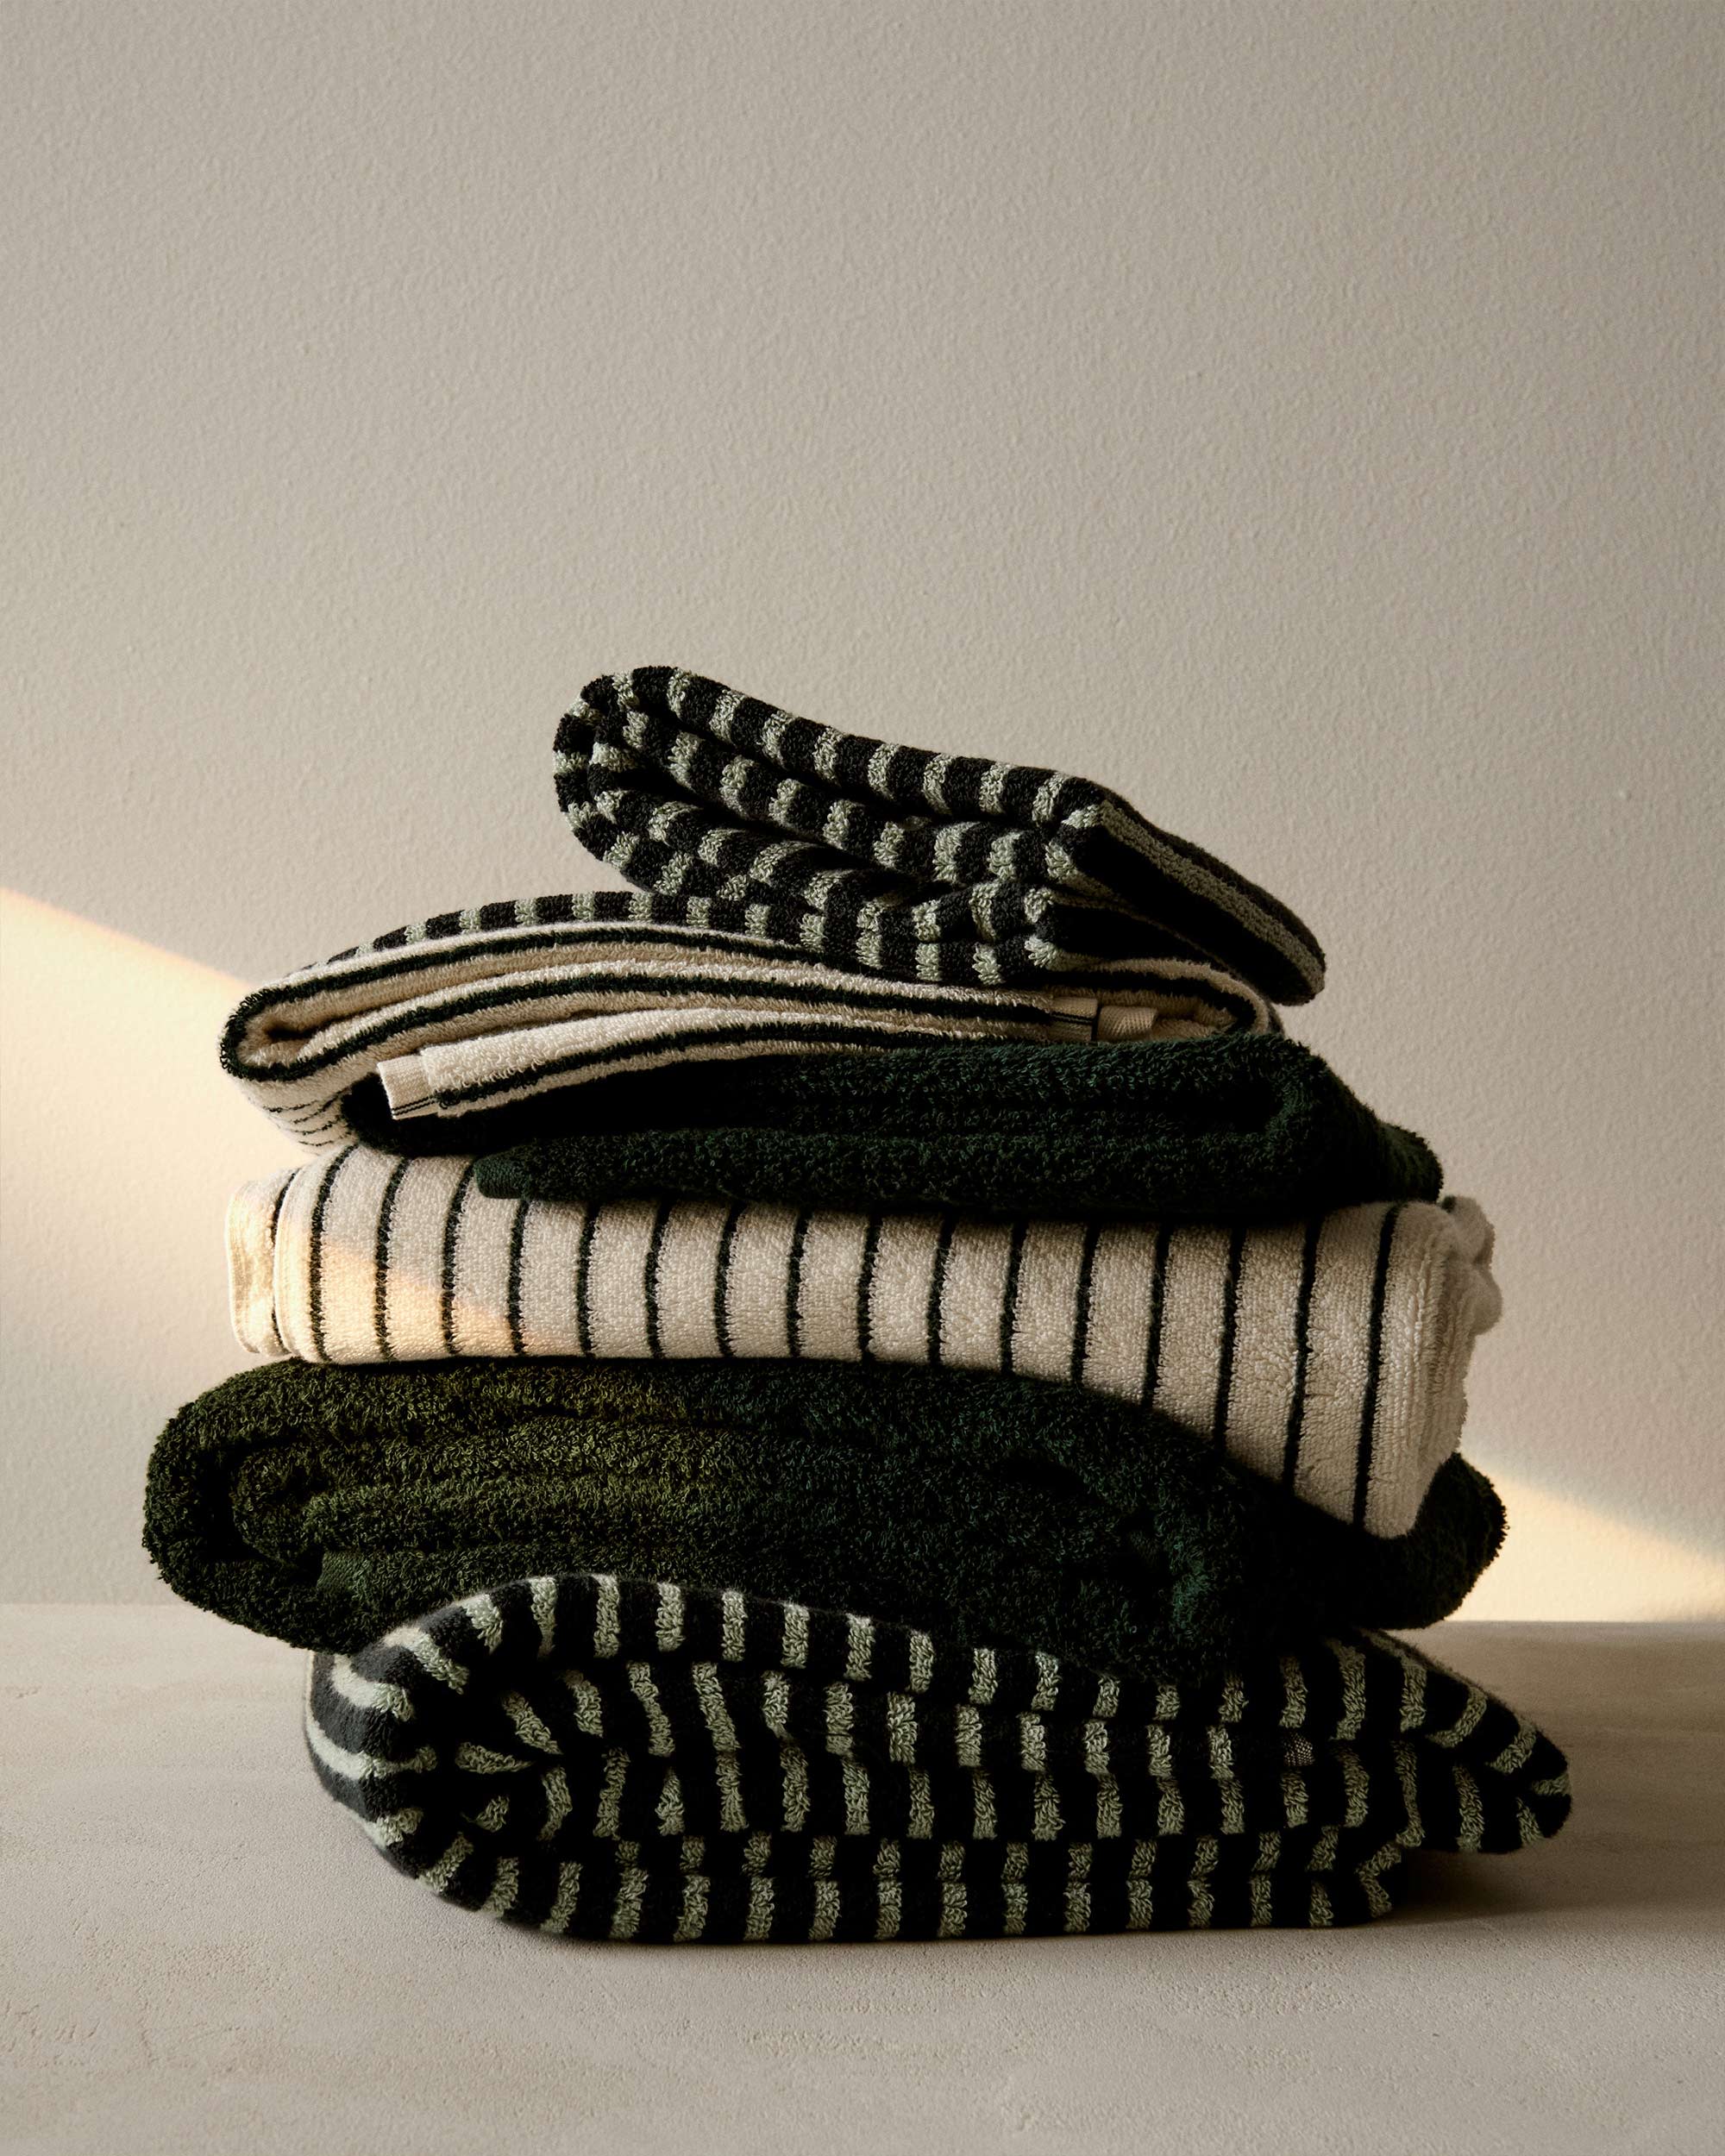 Many stacked towels